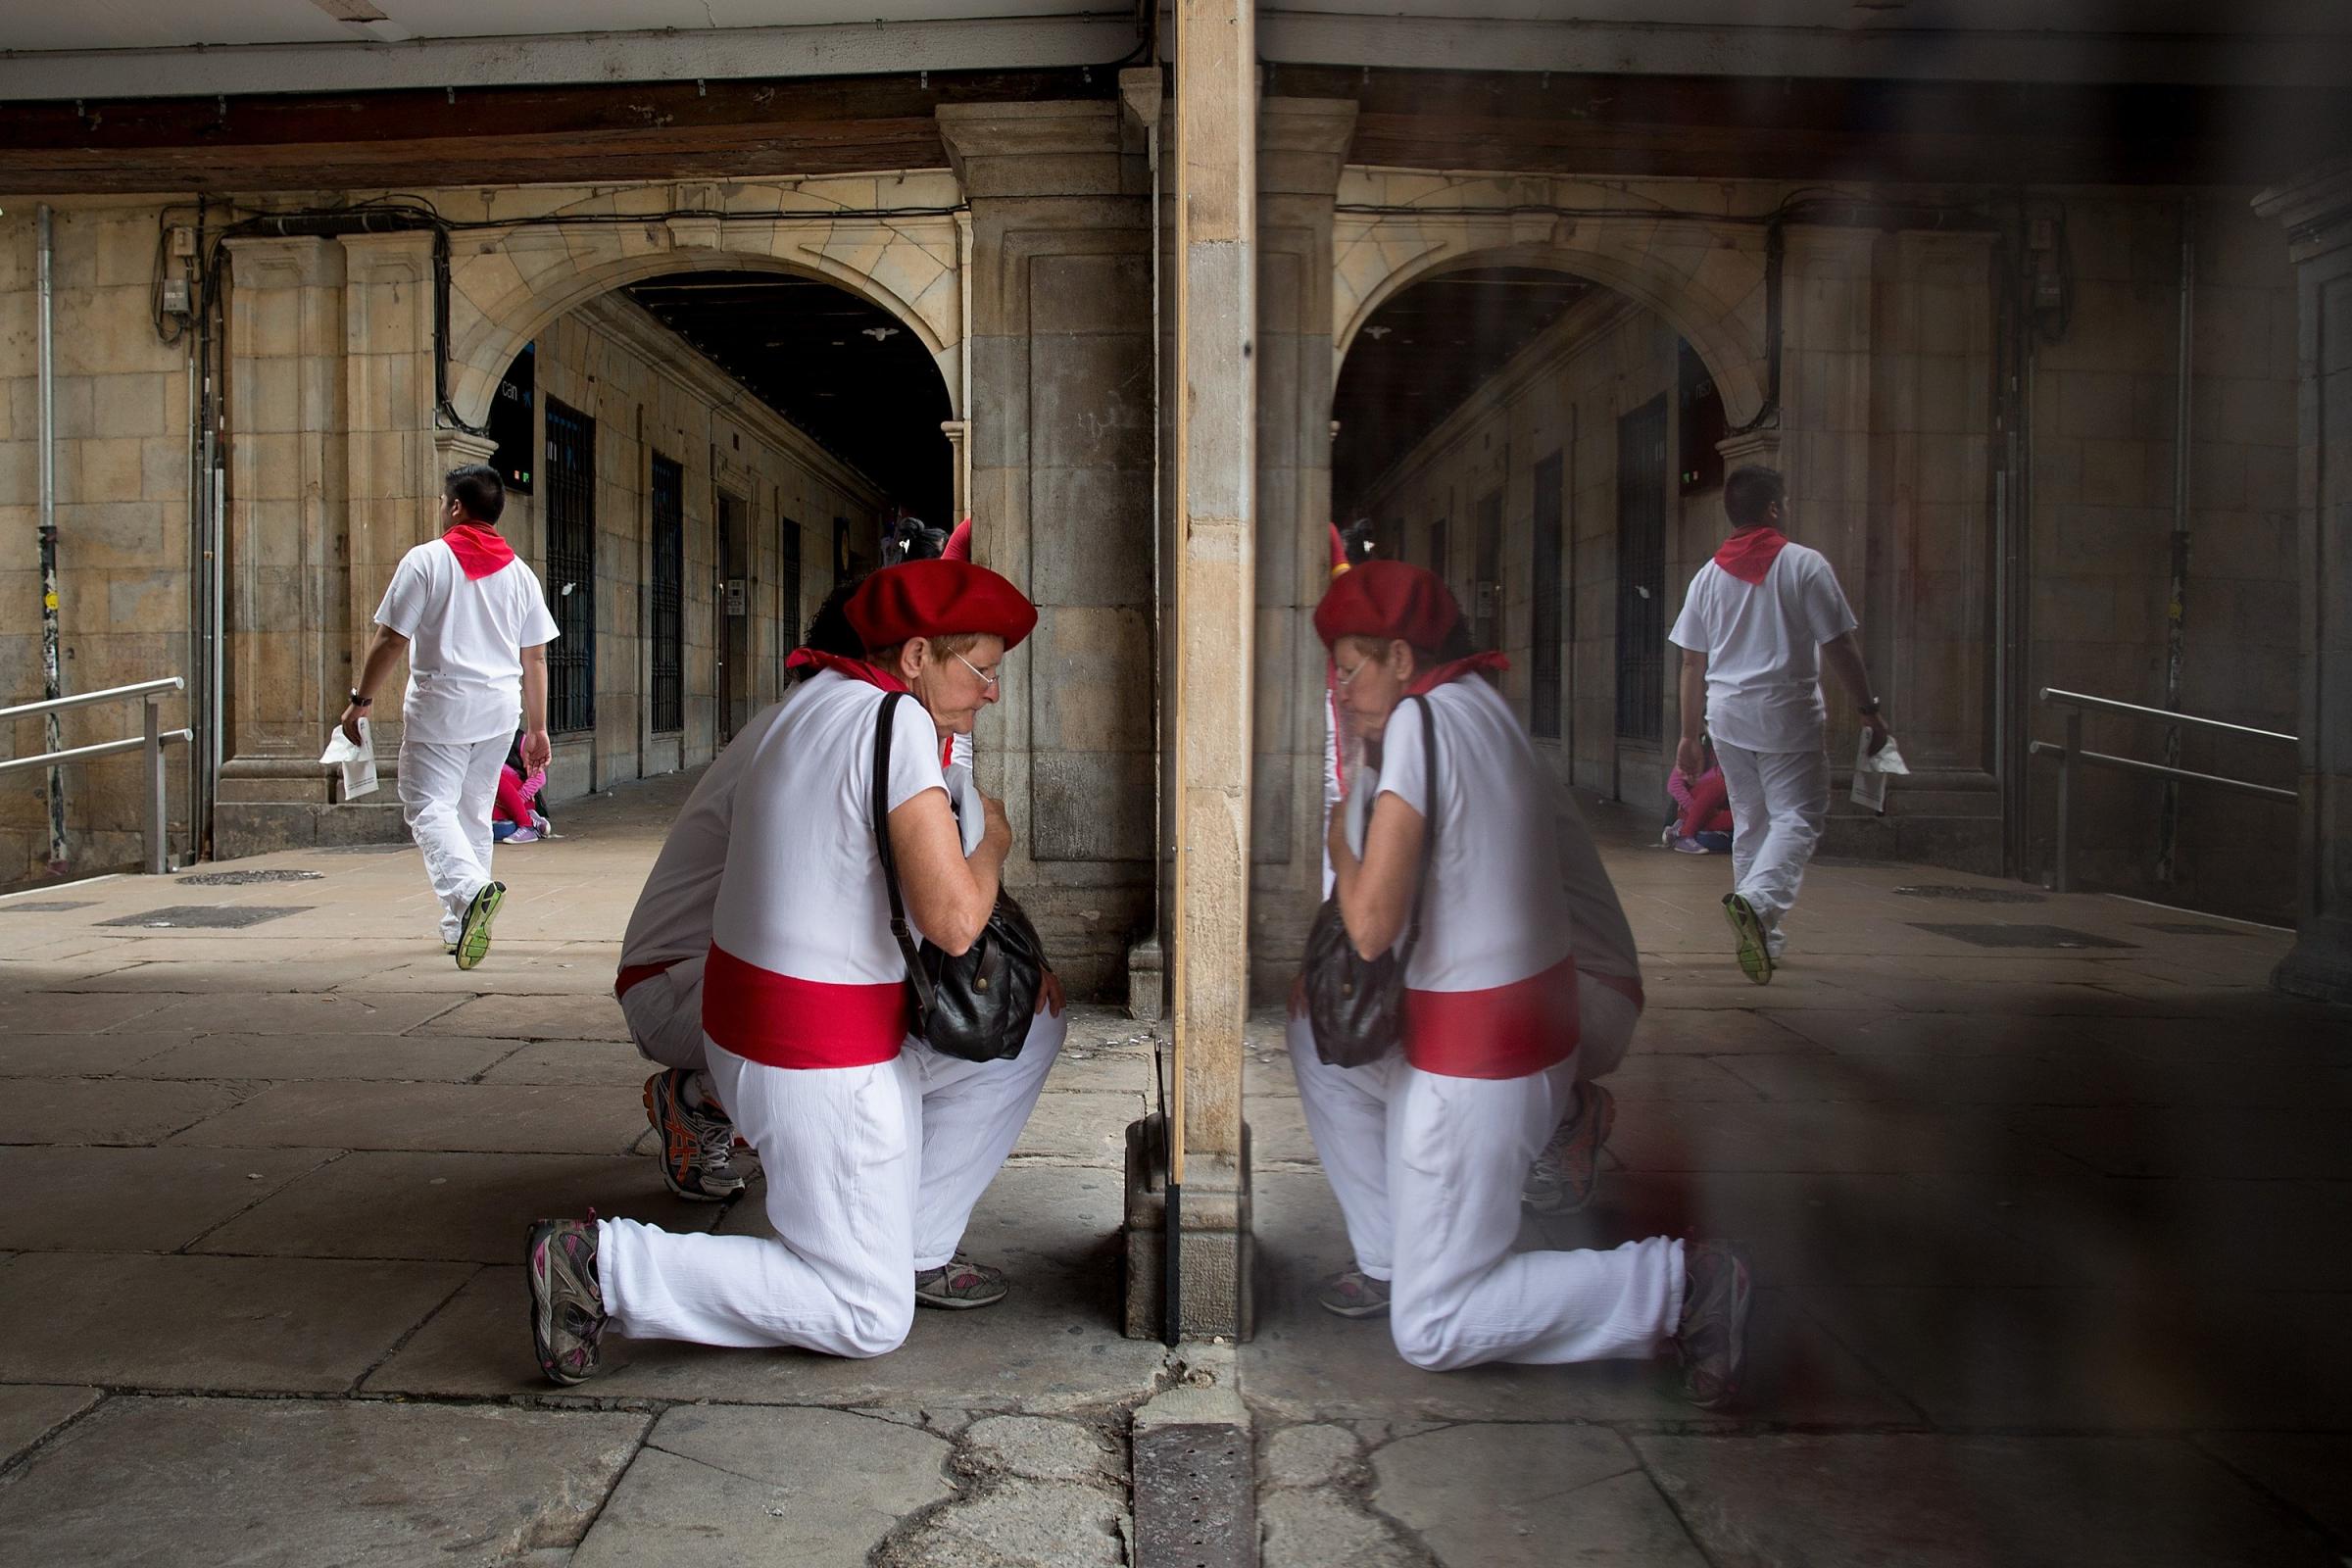 A reveller checks pictures of runners at a photo shop after the Dolores Aguirre Ybarra's fighting bulls during the third day of the San Fermin Running Of The Bulls festival on July 8, 2014 in Pamplona, Spain.